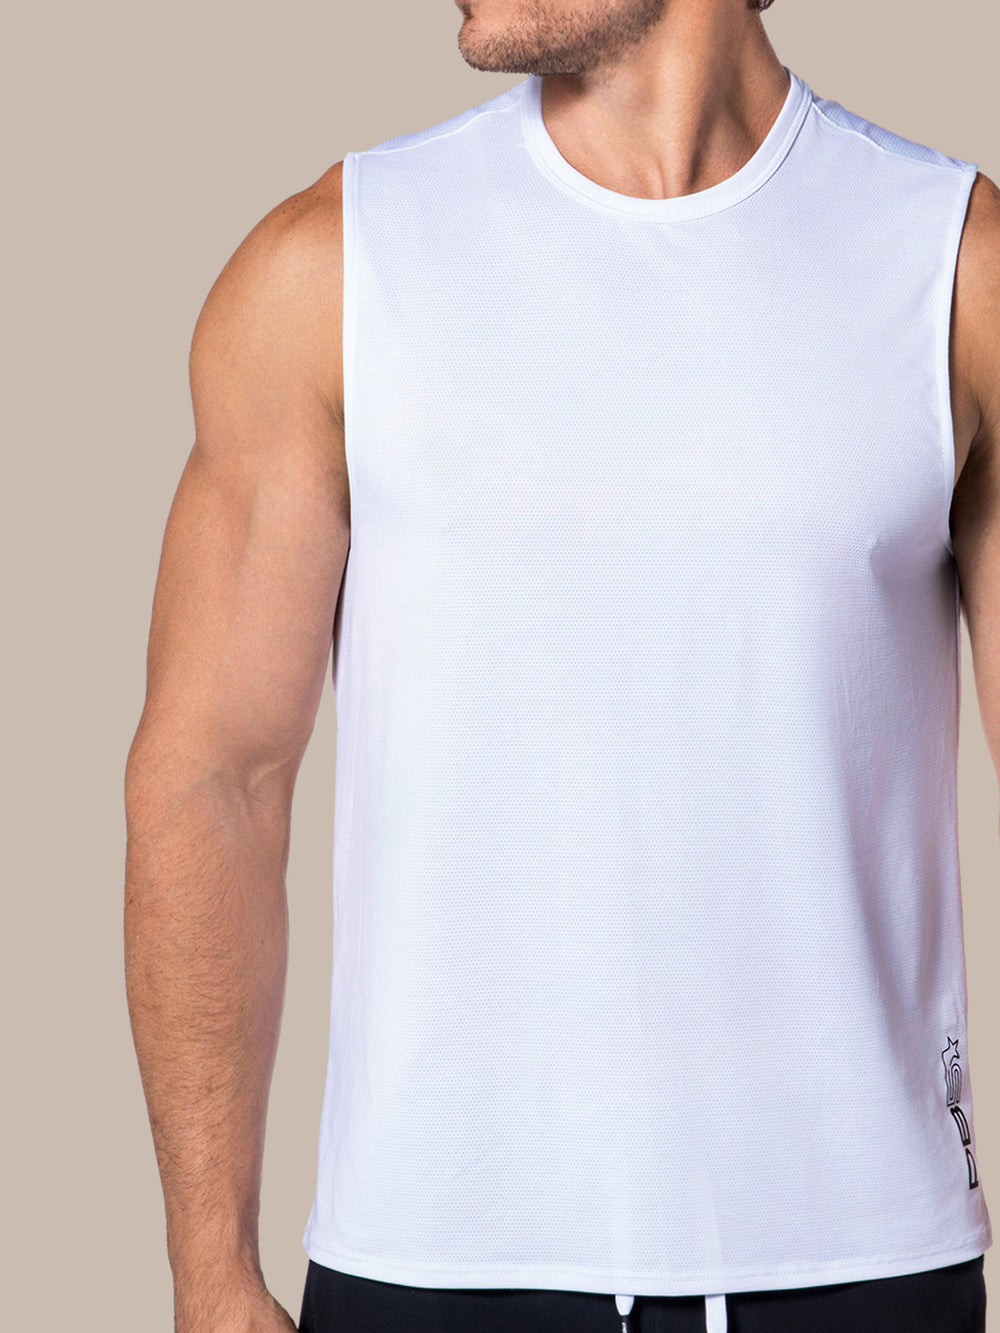 Muscular man in a white PB5star Vented Sleeveless Tee, suitable for gym and active lifestyle.